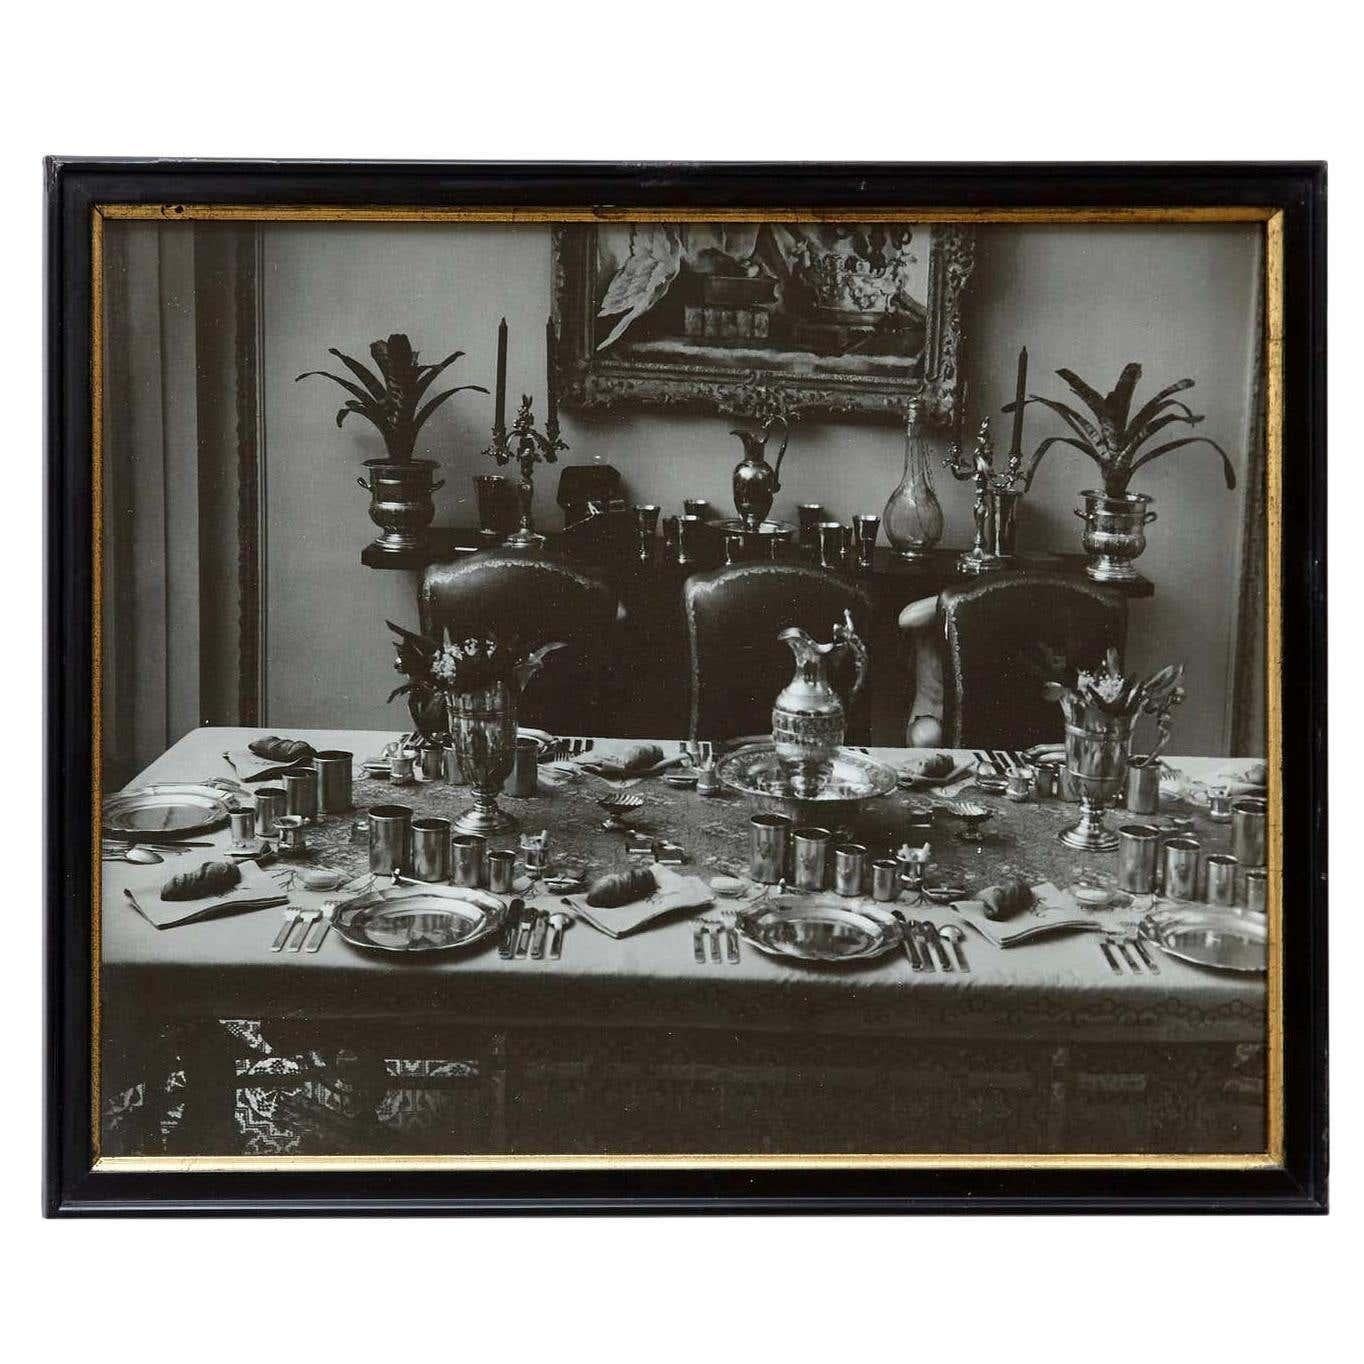 Brassai Black and White Framed Photography, circa 1936 For Sale 5